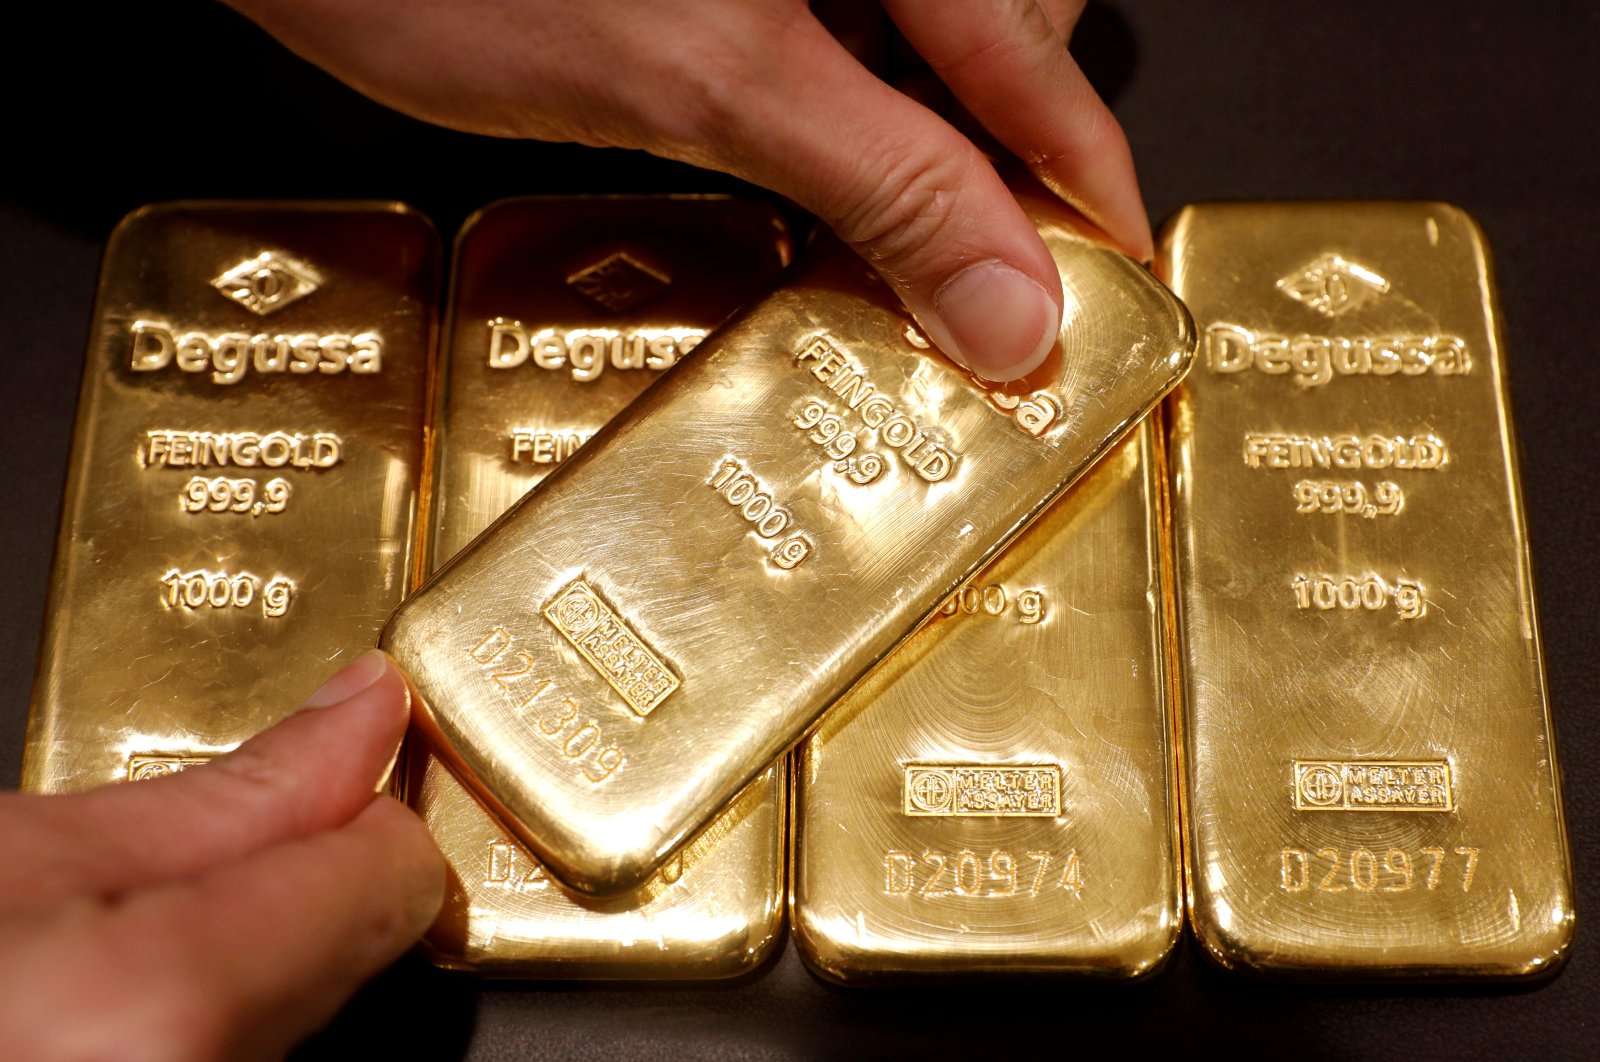 In this June 16, 2017, file photo, an employee shows gold bullions at Degussa shop in Singapore. (Reuters Photo)